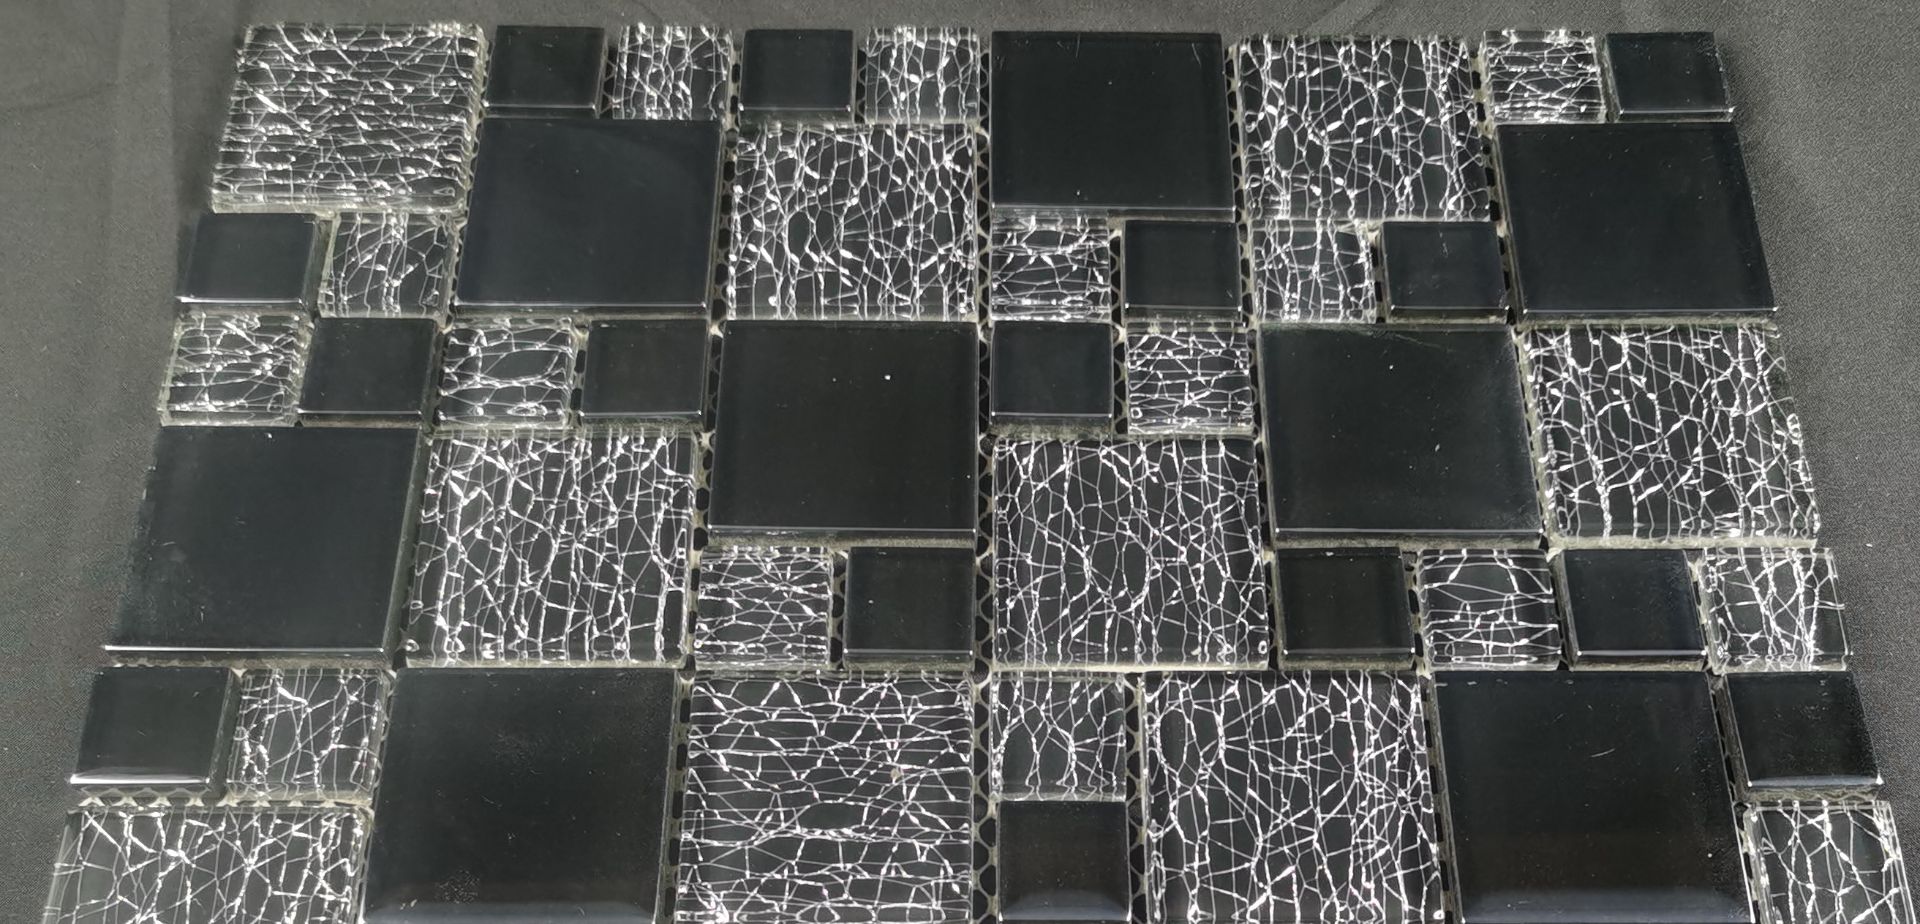 10 Square Metres - High Quality Glass/Stainless Steel Mosaic Tiles--110 Sheets - Image 3 of 5